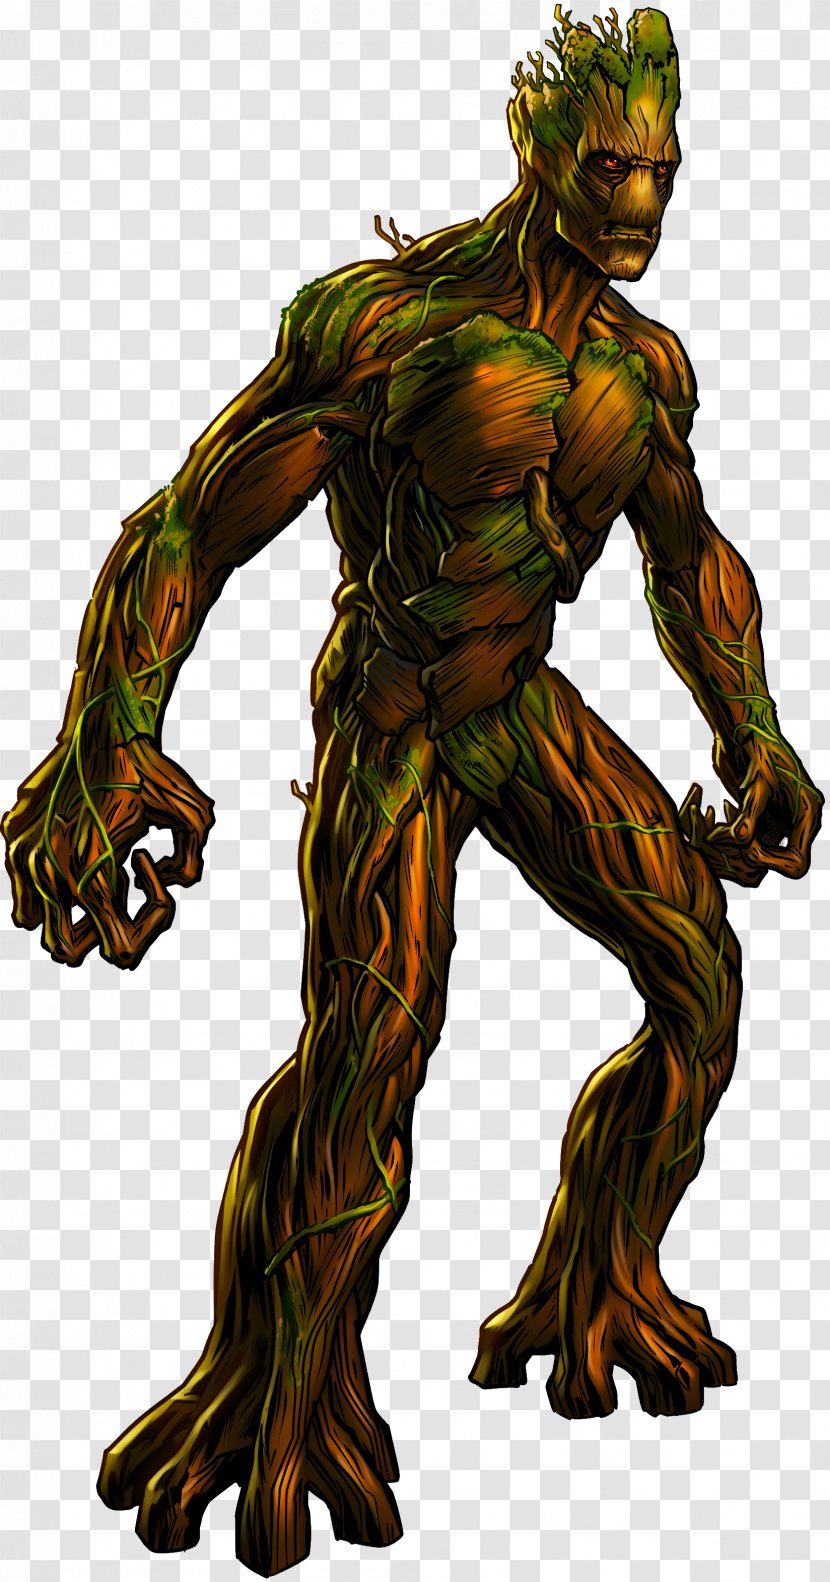 Baby Groot Rocket Raccoon Drax The Destroyer Marvel: Avengers Alliance - Organism Transparent PNG